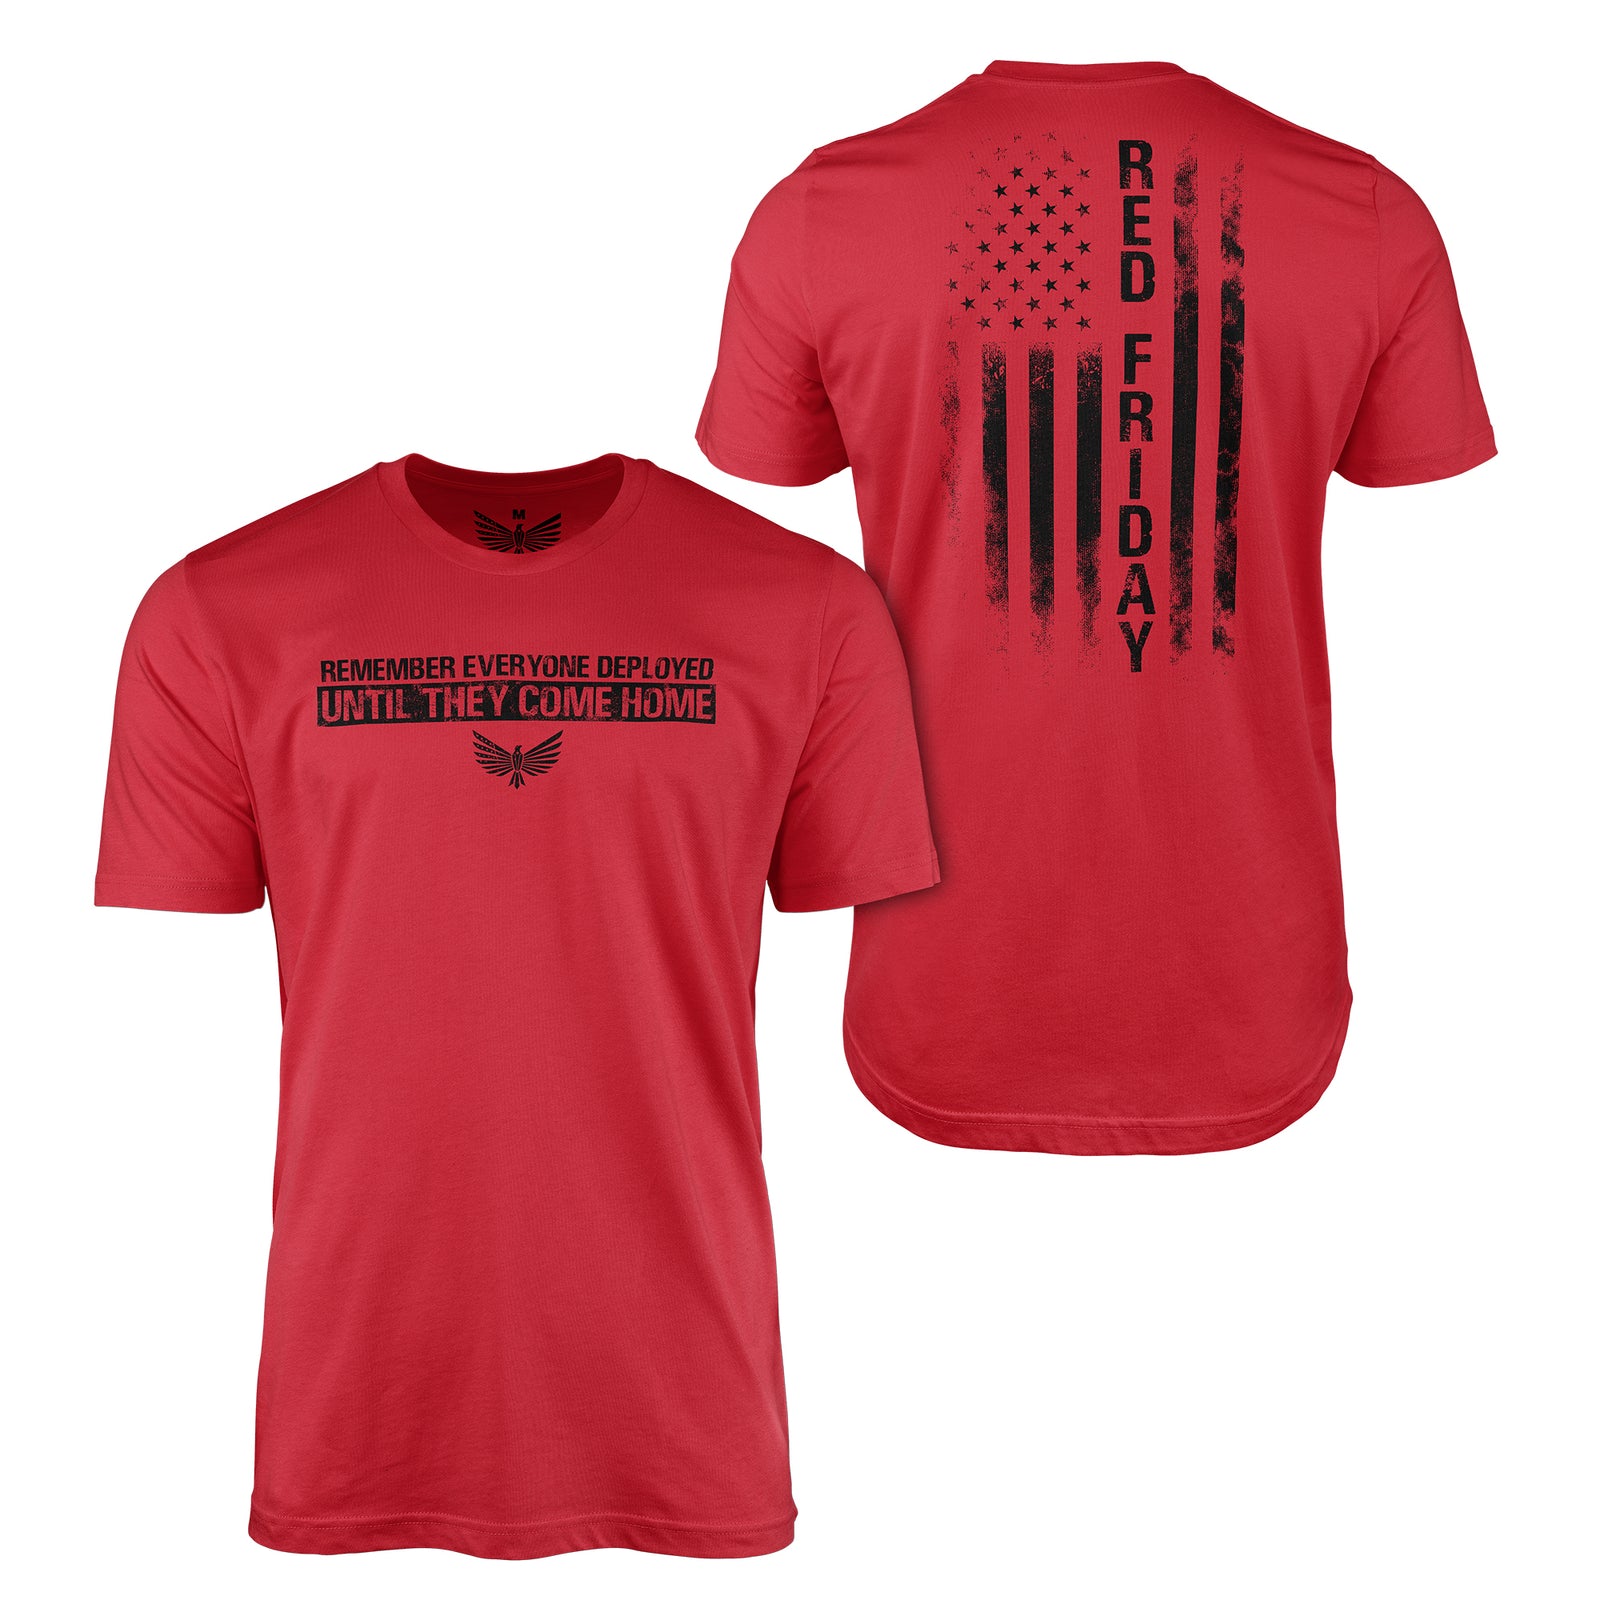 Red Friday-Men's Shirt-XS-Ardent Patriot Apparel Co.